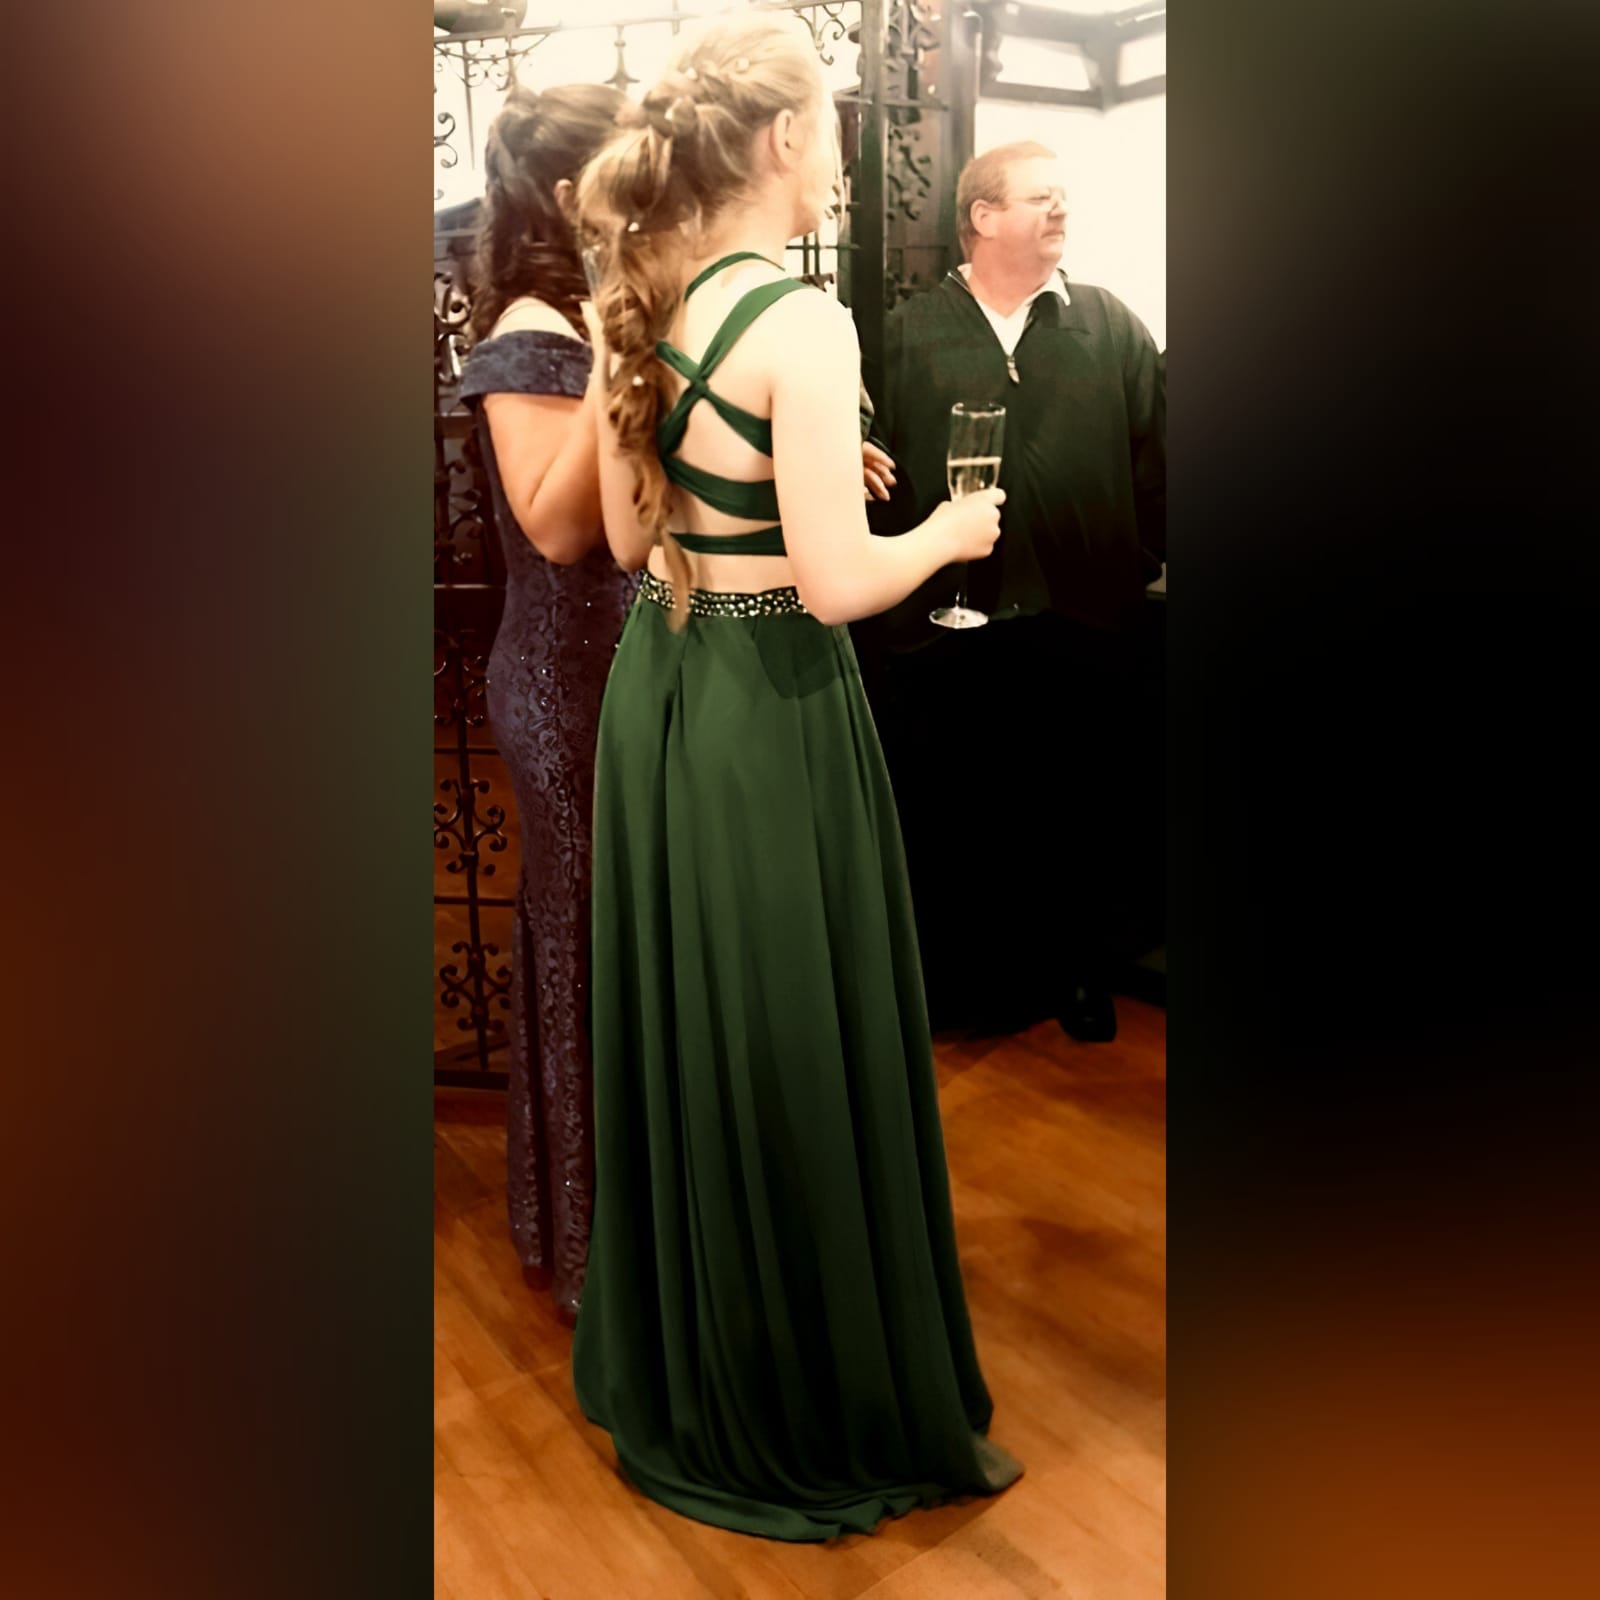 Olive green 2 piece prom dress 7 olive green 2 piece prom dress. Flowy long chiffon shirt with a little train and waistband detailed with silver beads. Pleated crop top with a rounded deep neckline , backless design with strap detail.